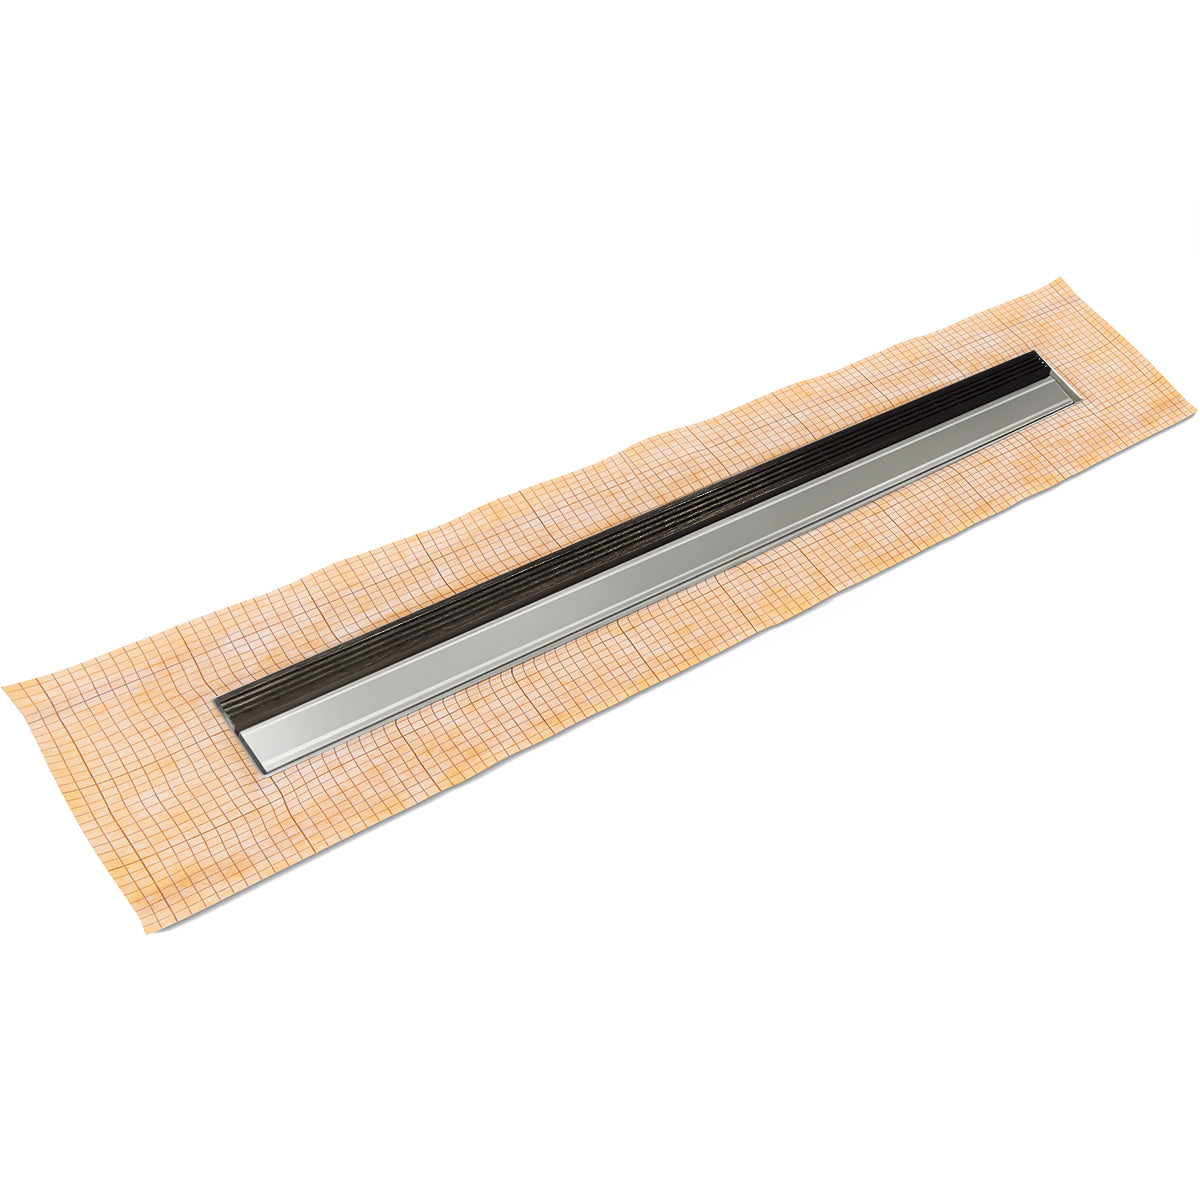 Infinity Drain 48" FCS Series Schluter-Kerdi - Fixed Flange Linear Drain Kit with 1" Wedge Wire Grate